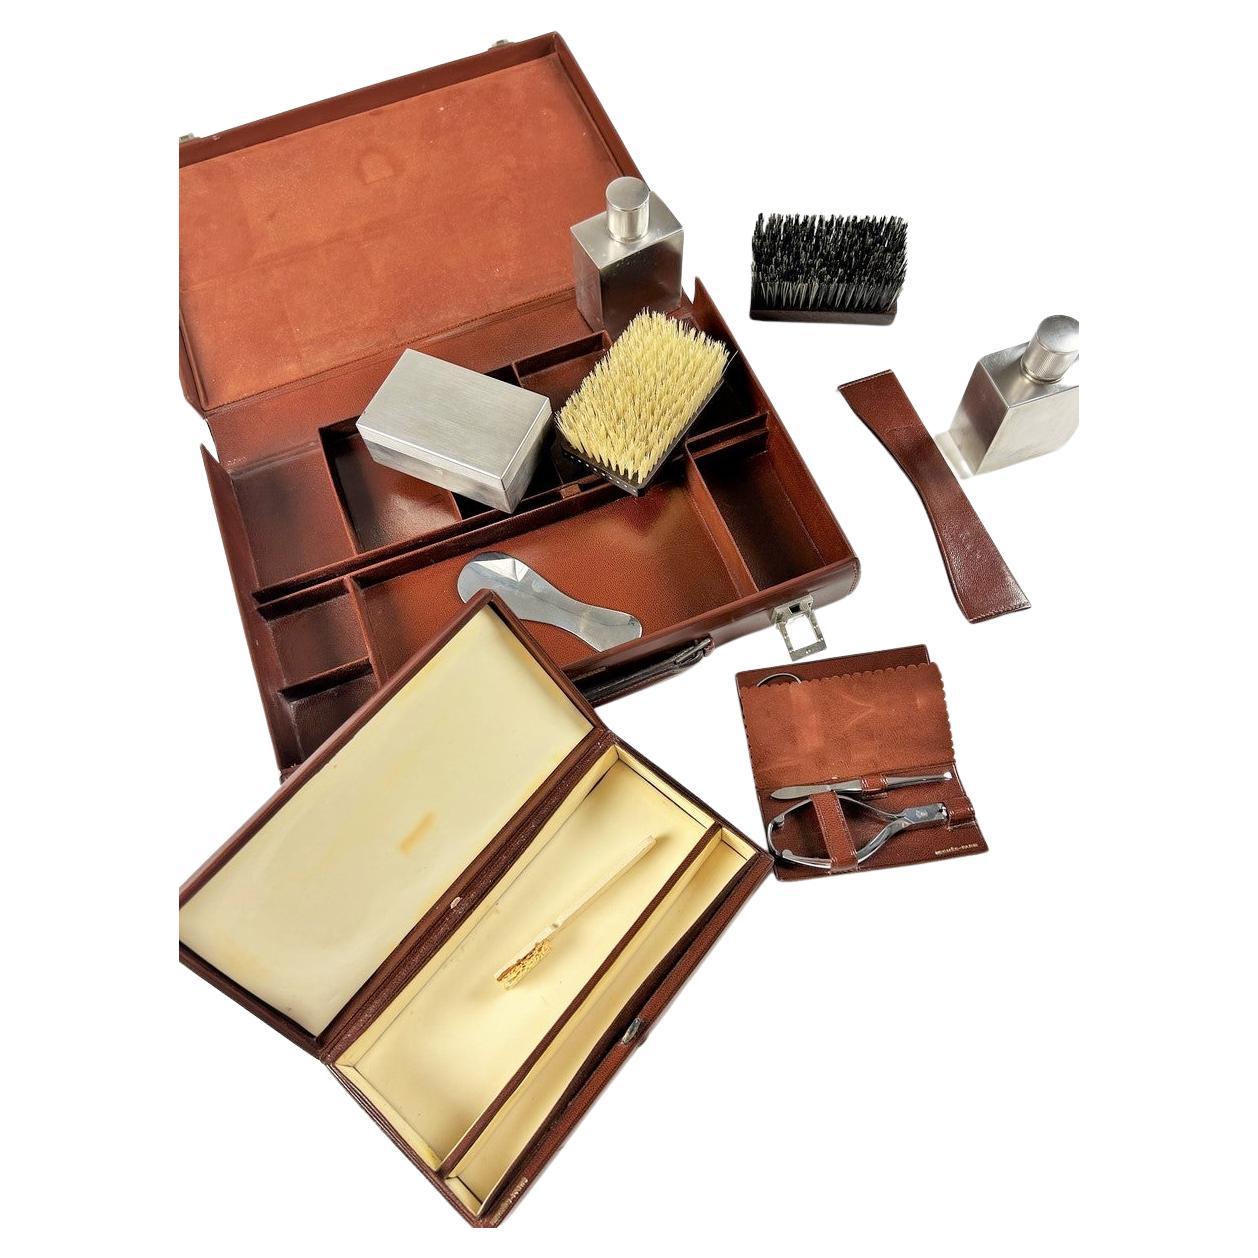 Circa 1970

France

Elegant vintage Hermès travel case with toiletries in a red Hermès leather case with compartments. This case is stamped Hermès Paris in gold lettering and closes with two H-shaped aluminium clips. Serial number 2948 inside. It